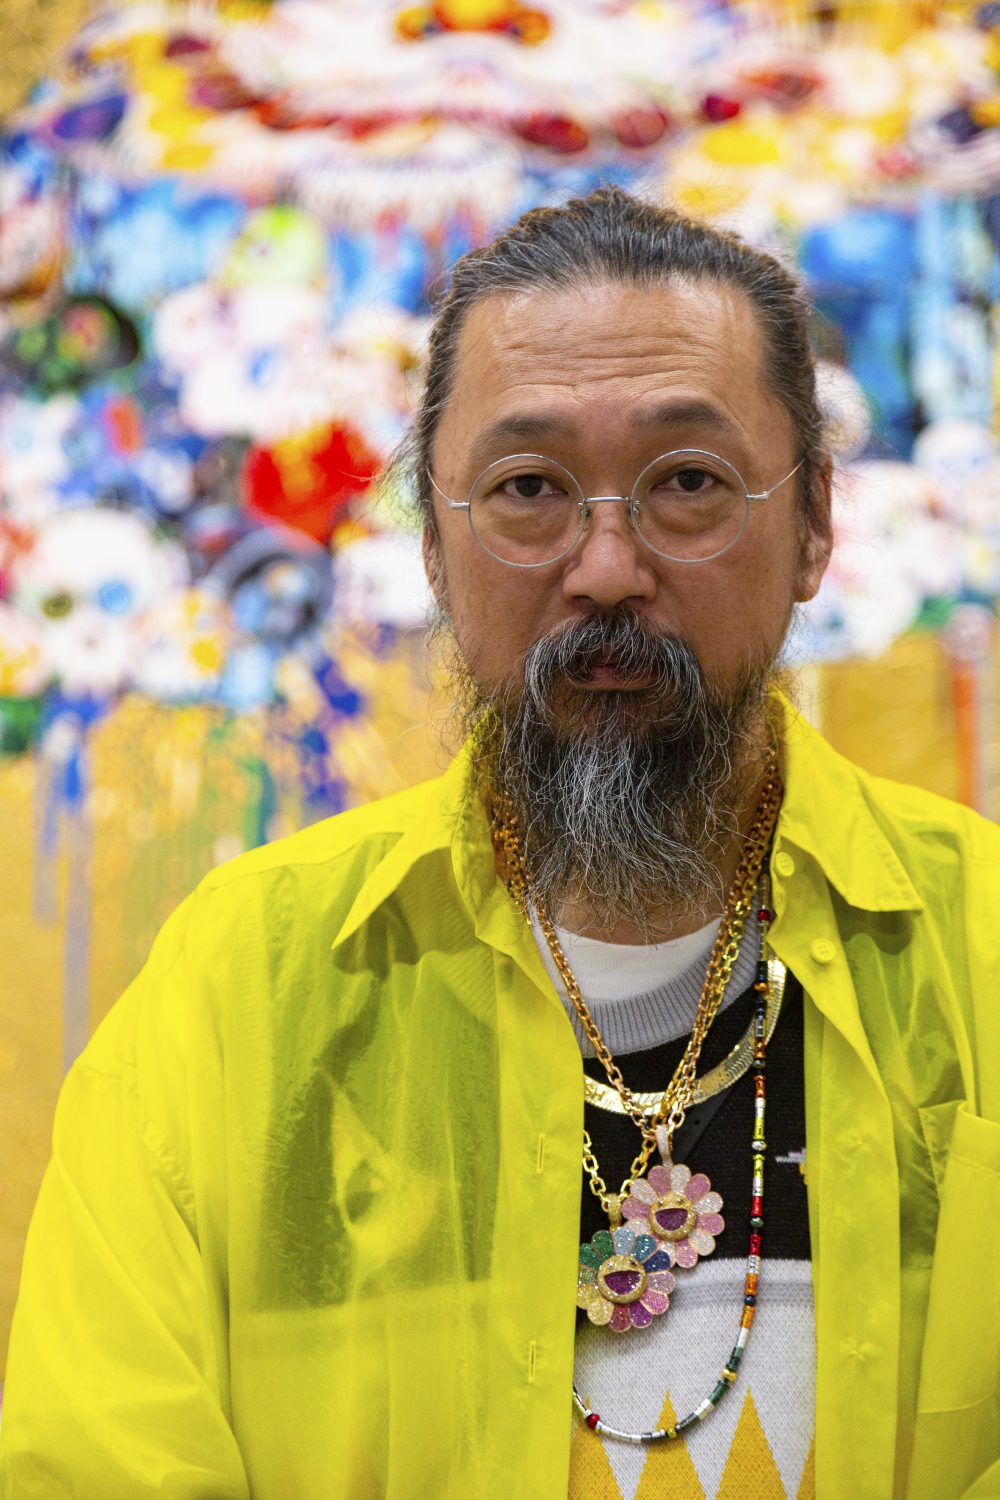 Artnet on X: Will NFTs save Murakami's business? After declaring